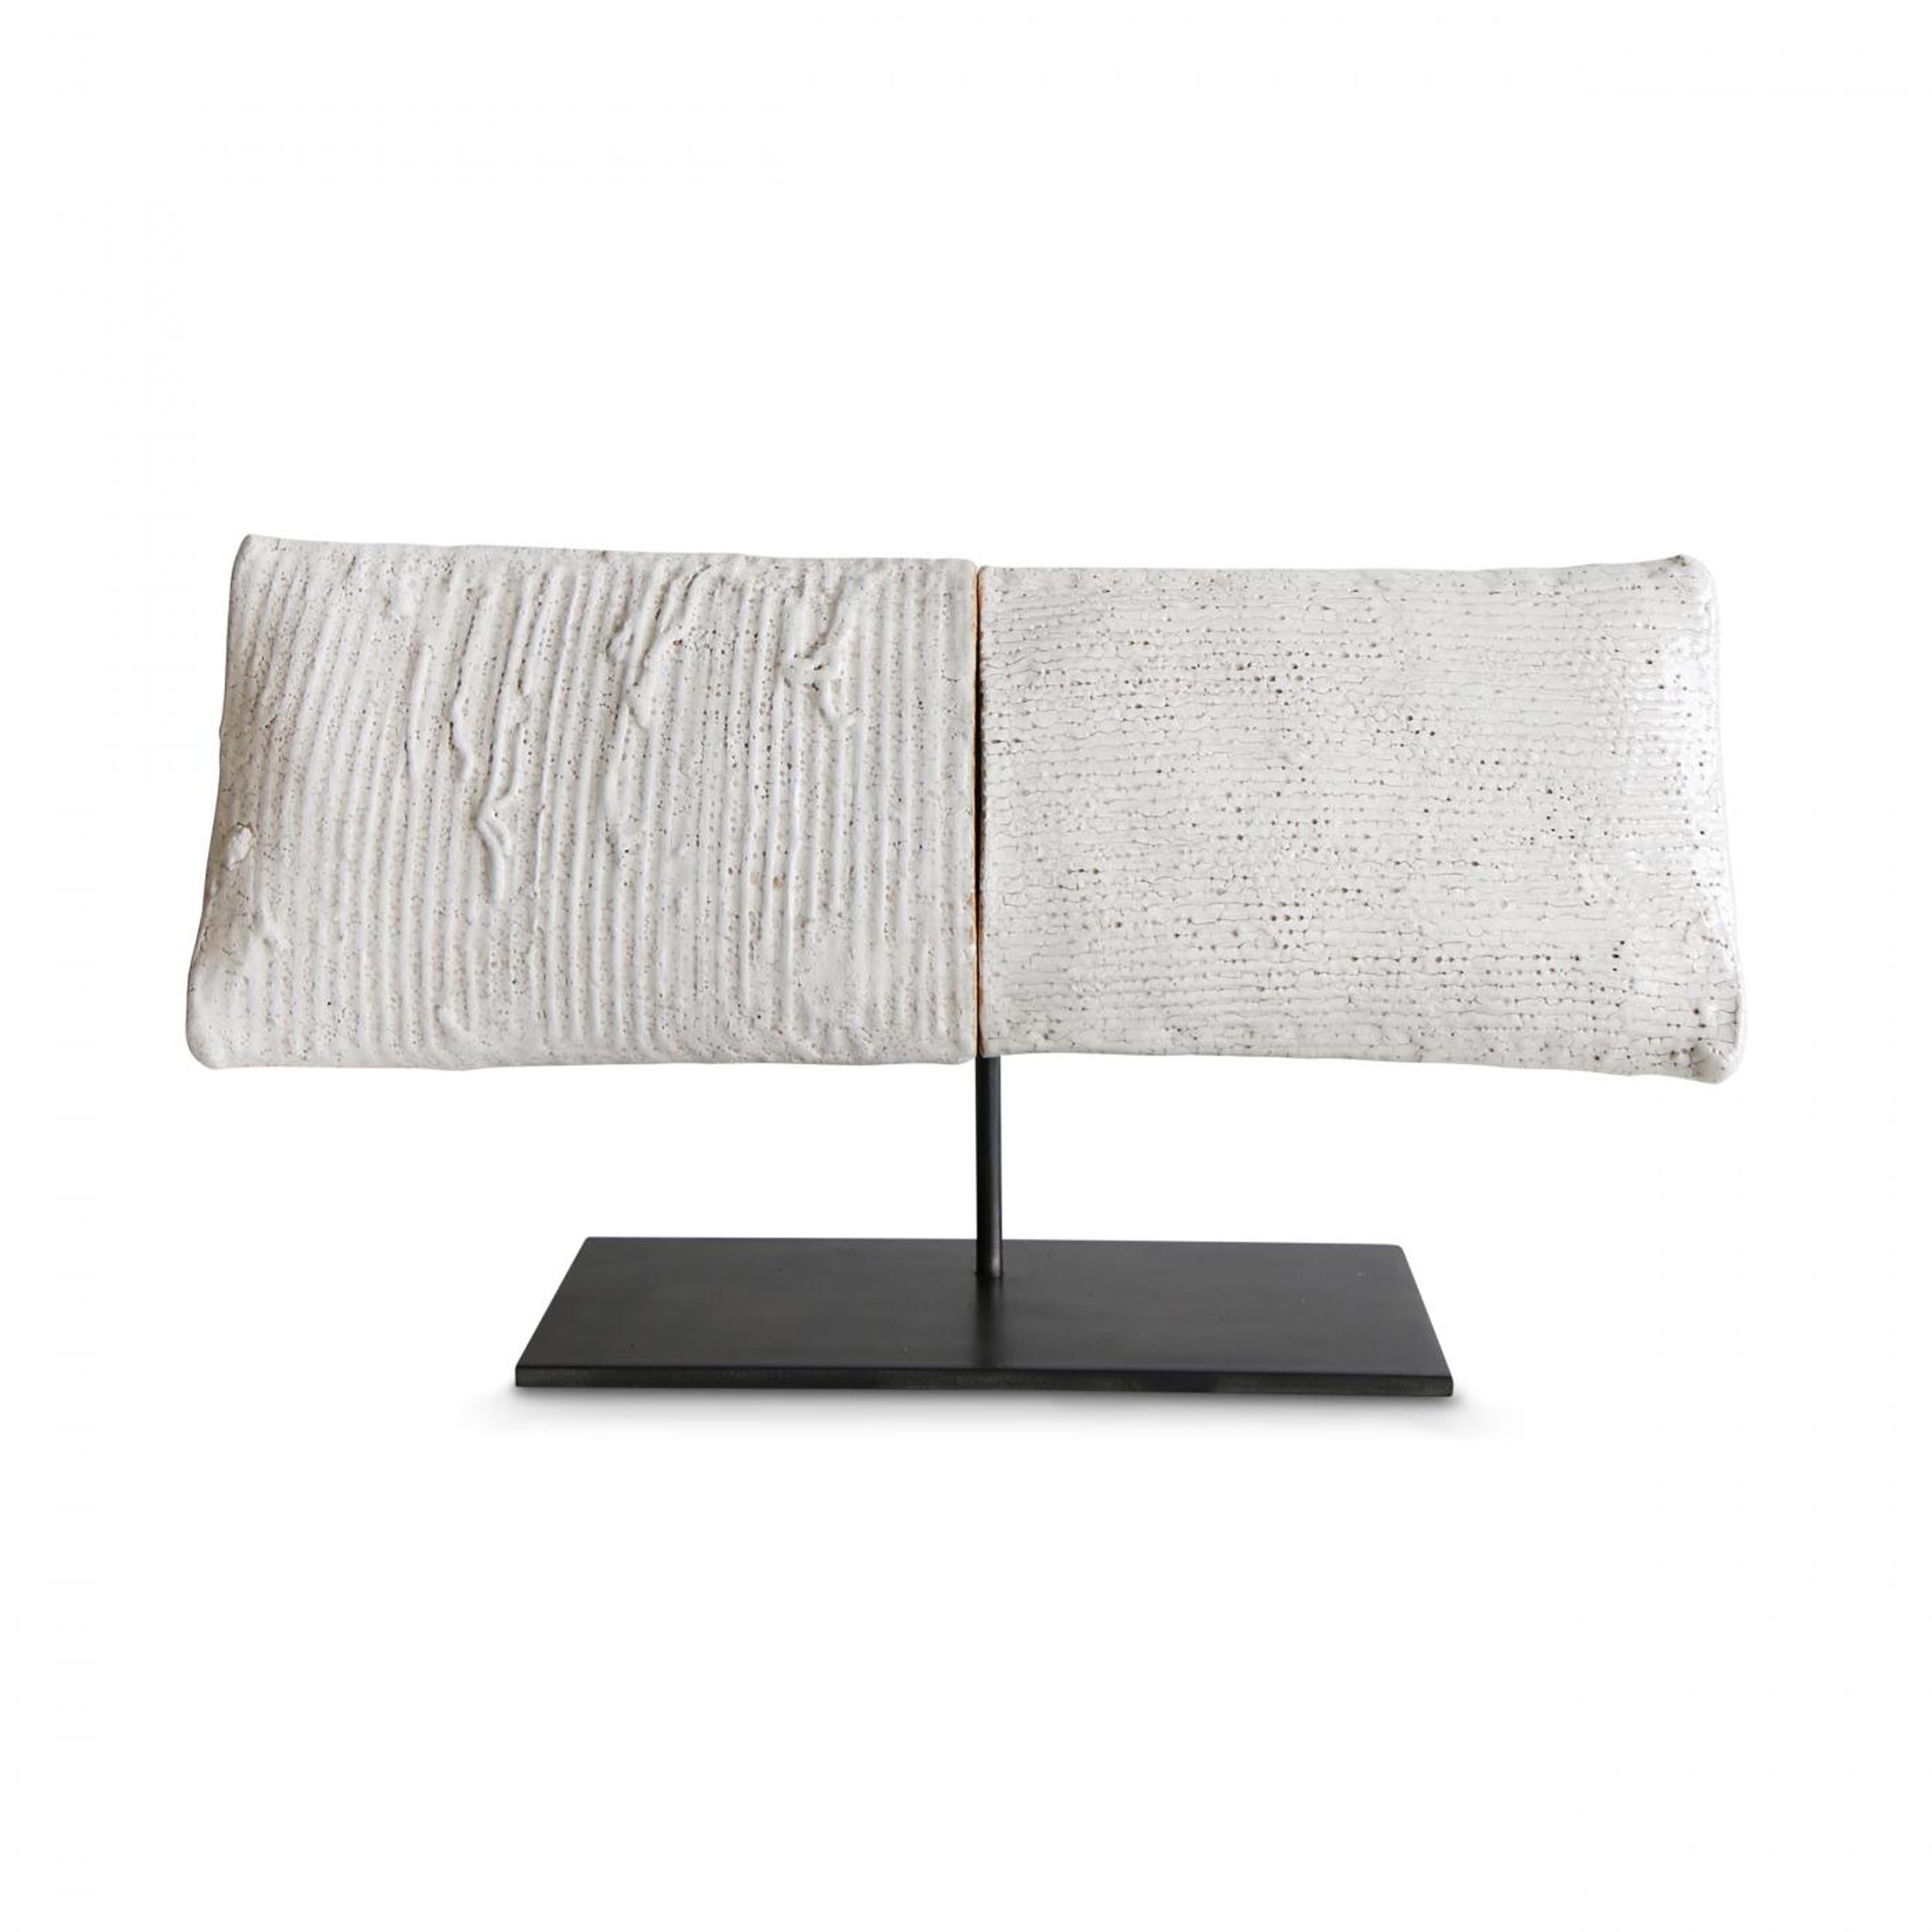 Brandon Reese Abstract Sculpture - WHITE PILLOW I ON IRON STAND